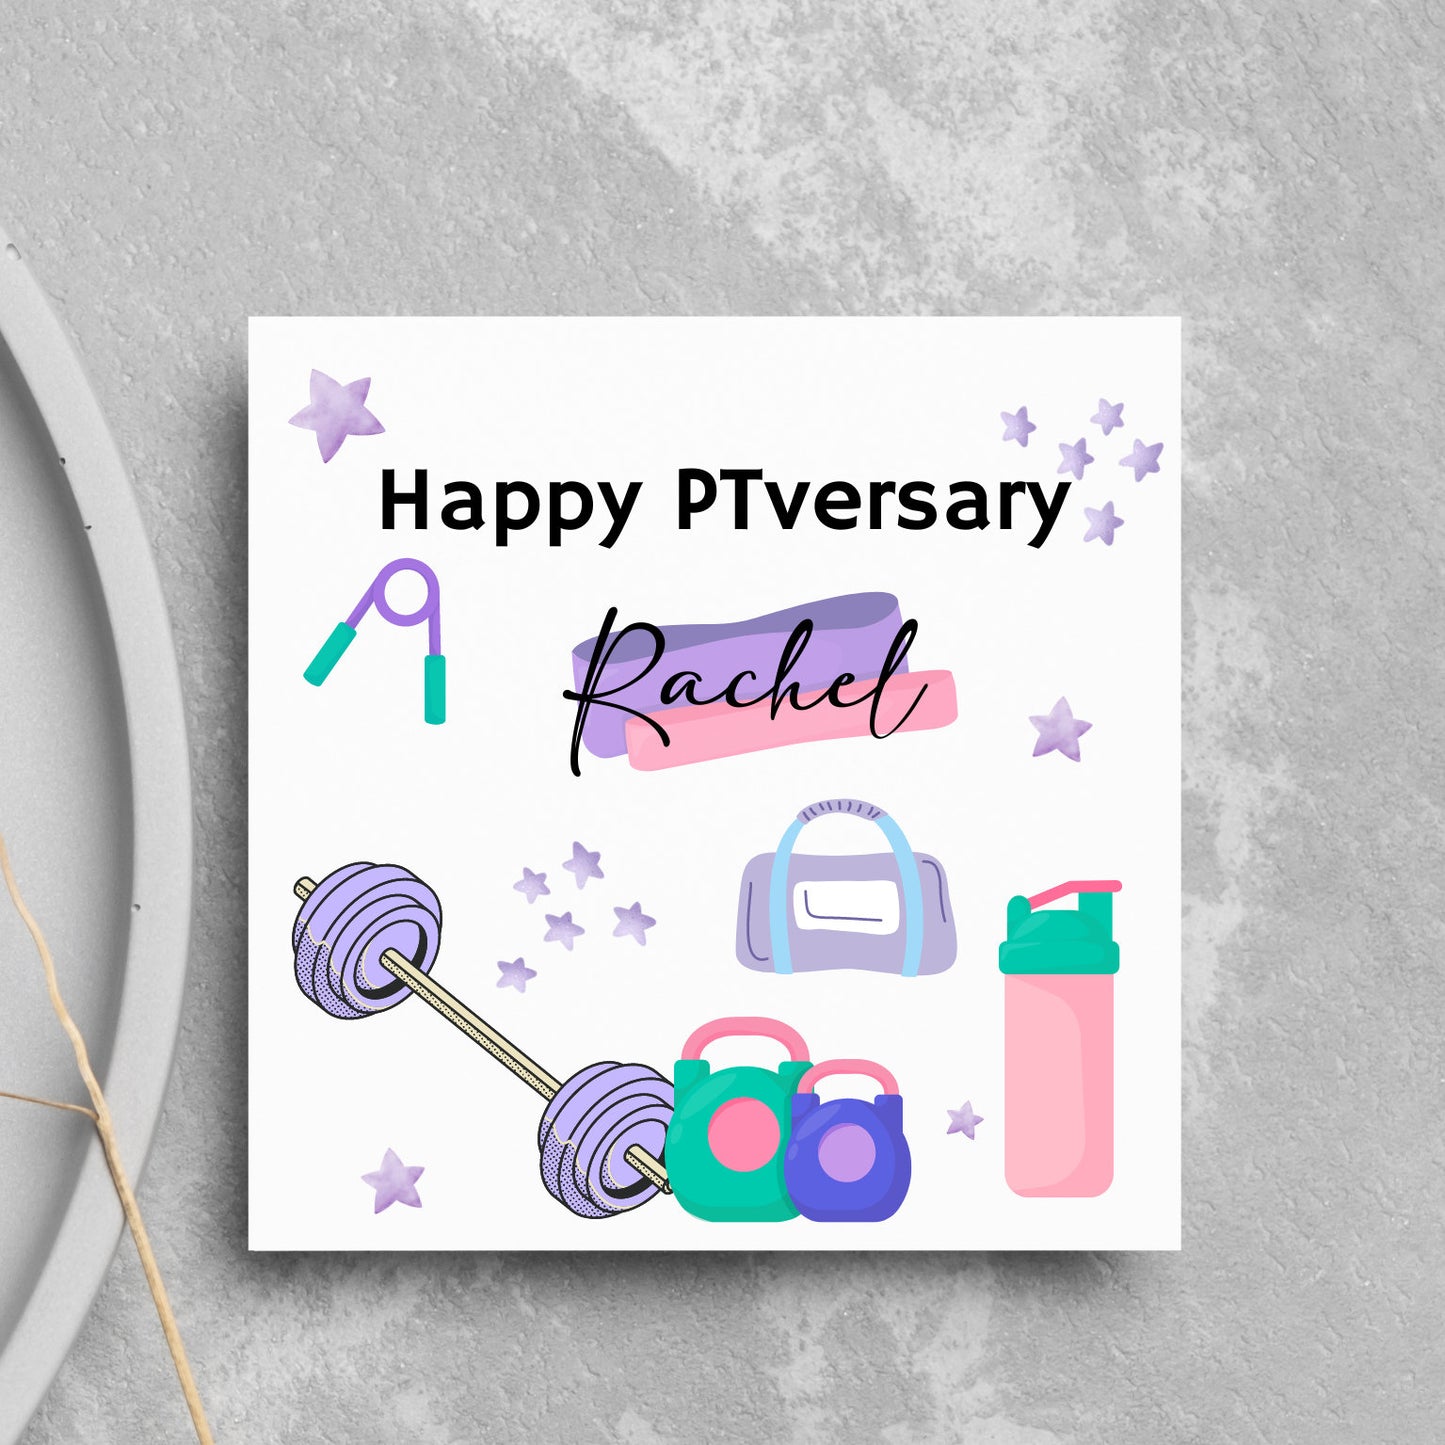 PT Card, Anniversary Card For Personal Trainer, PTversary, Personalised Card for PT, Gym Trainer Cards